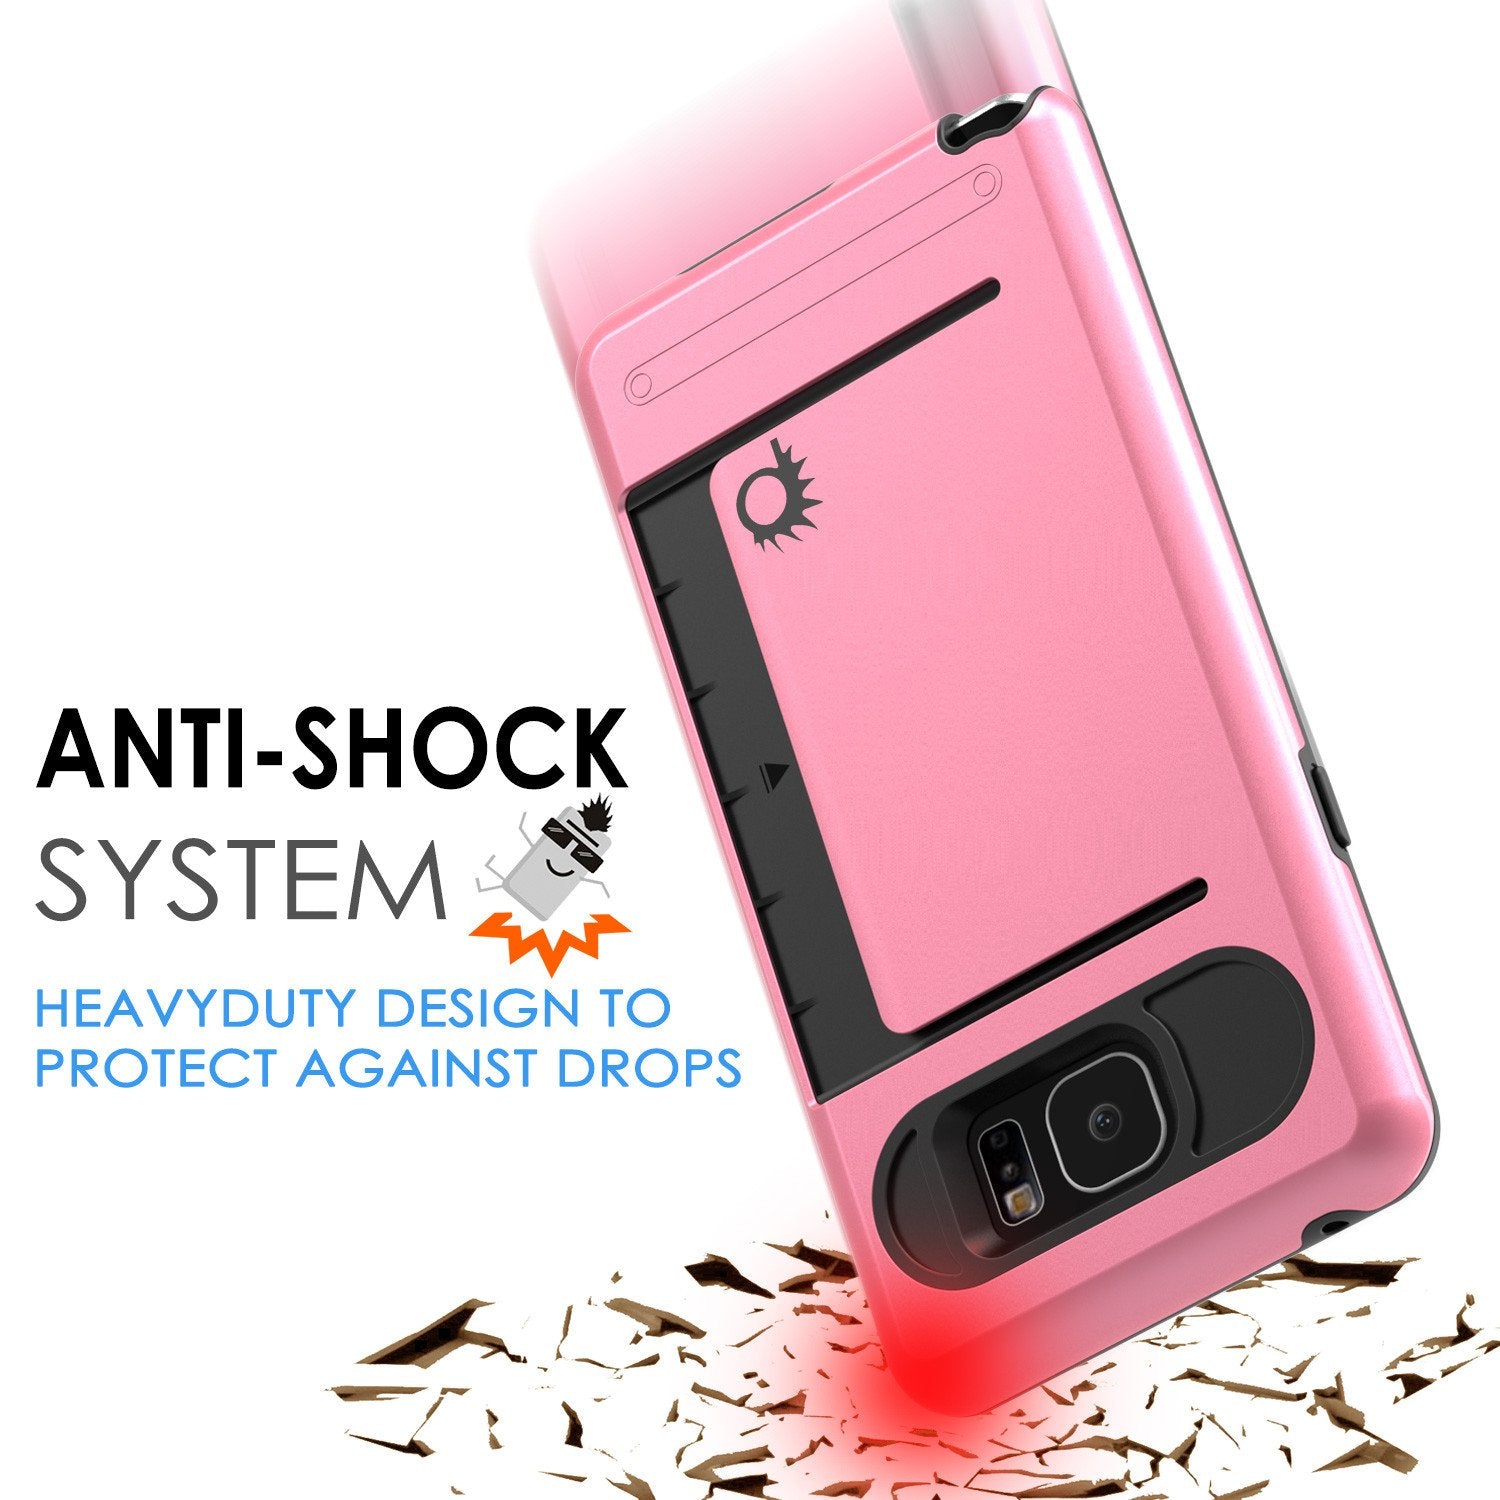 Galaxy Note 5 Case PunkCase CLUTCH Pink Series Slim Armor Soft Cover Case w/ Tempered Glass